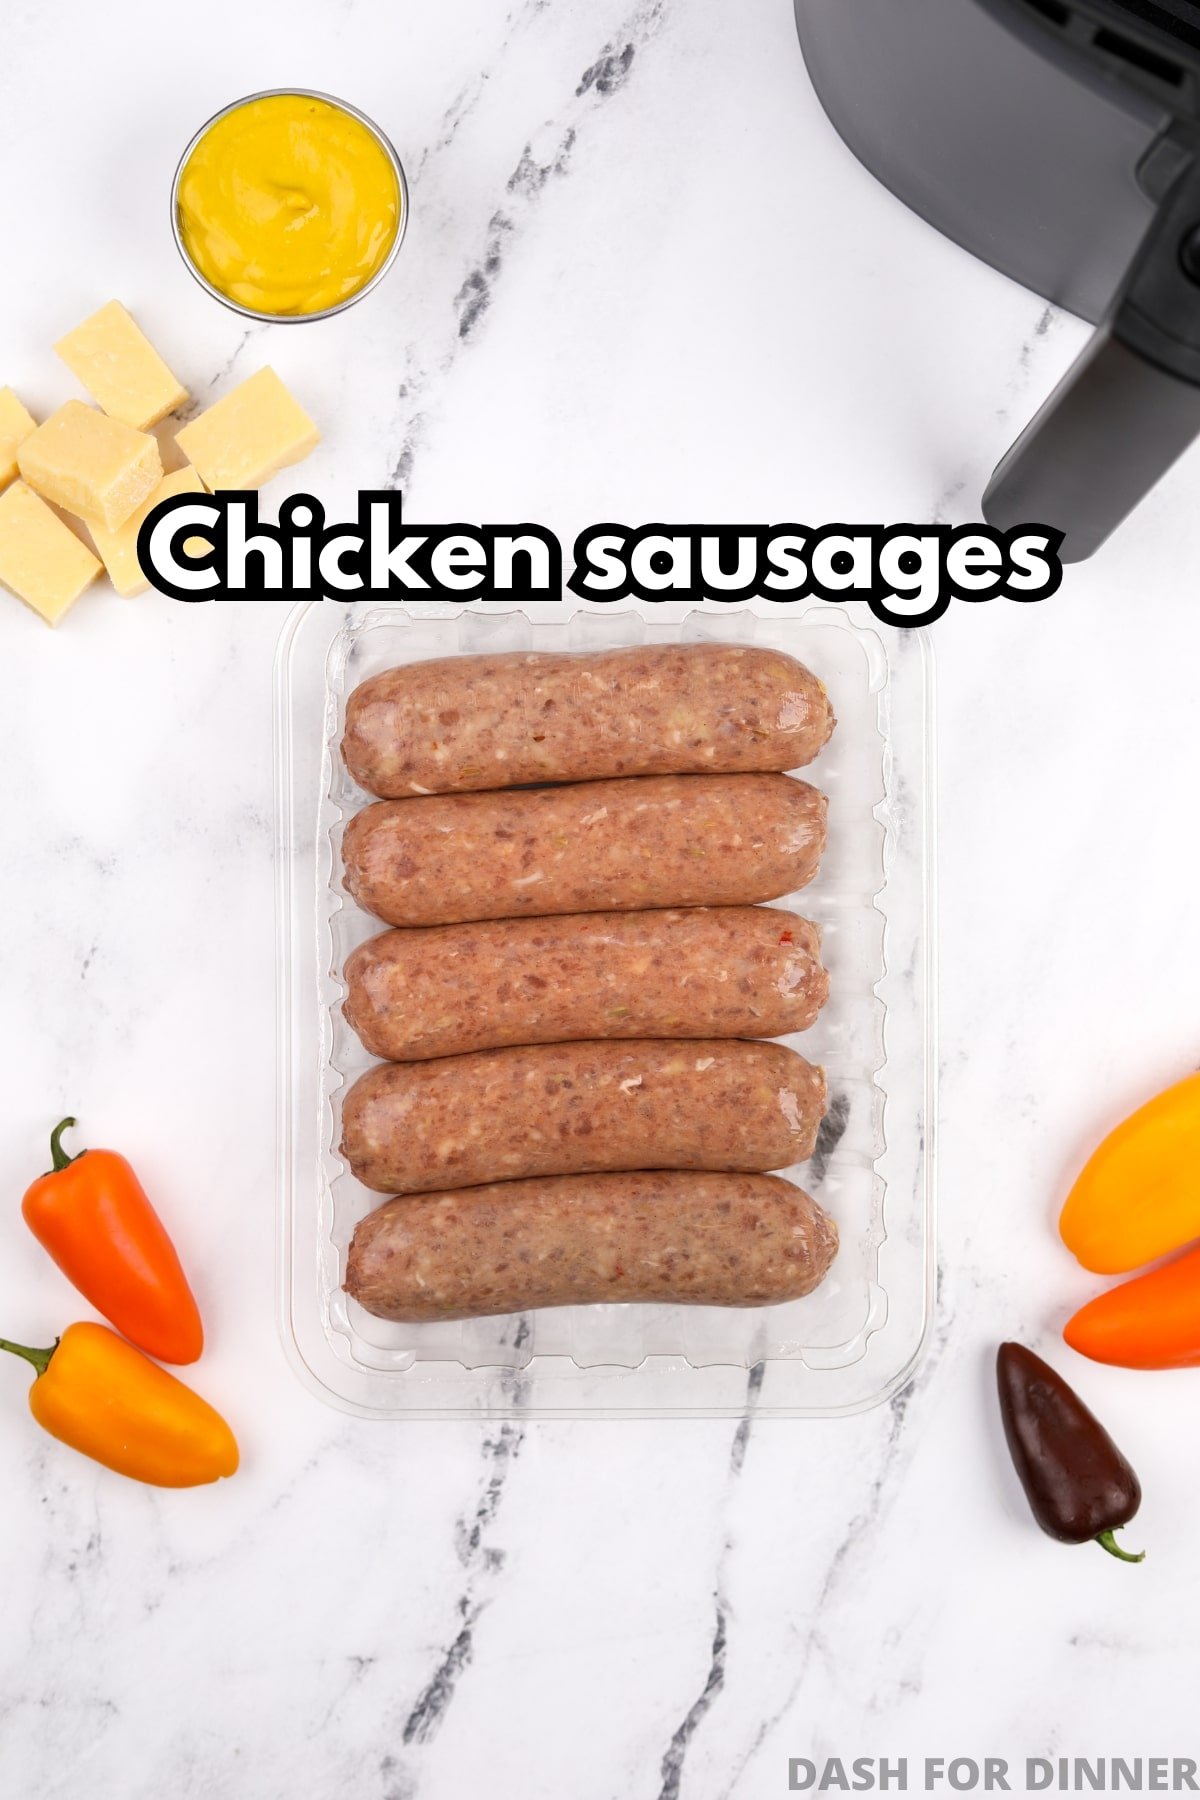 A plastic package featuring raw chicken sausages.